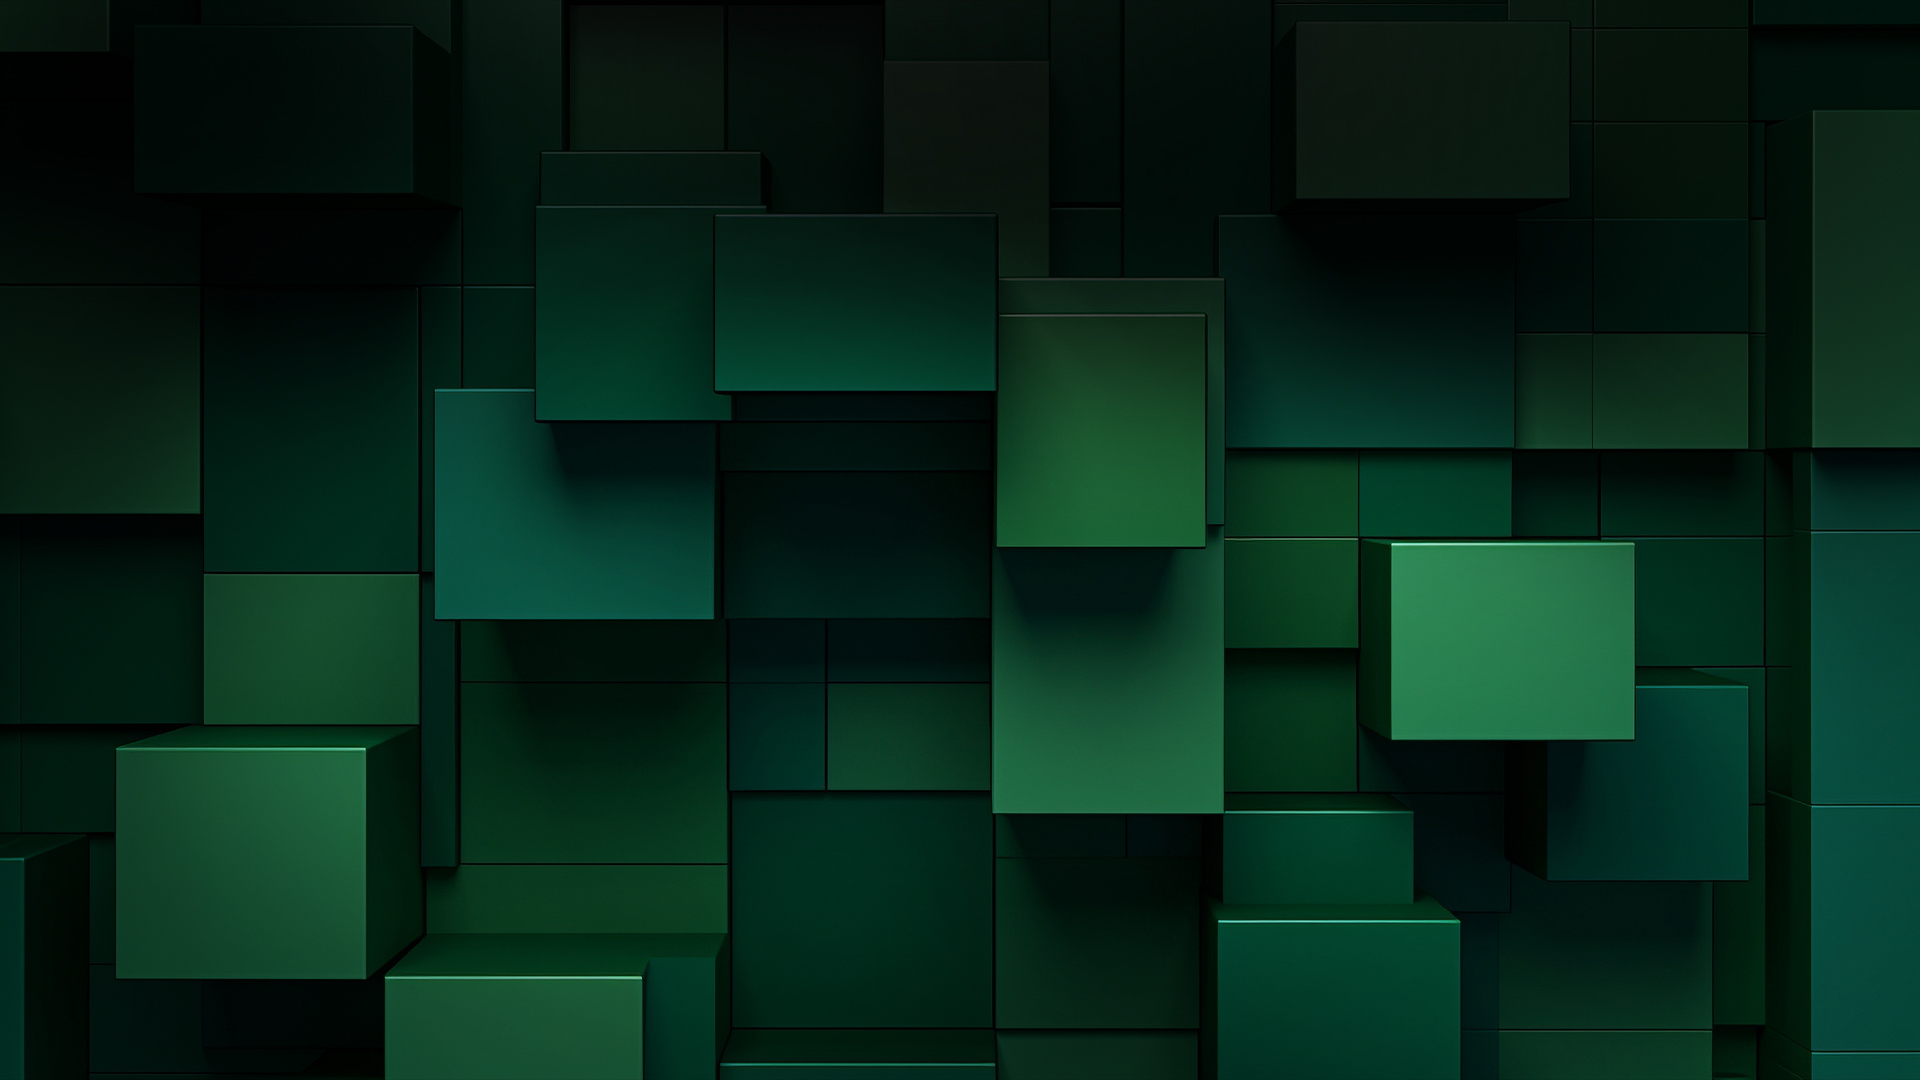 hero visual, featuring the campaign name and Game Pass logo on a background comprised of stacked green 3D blocks